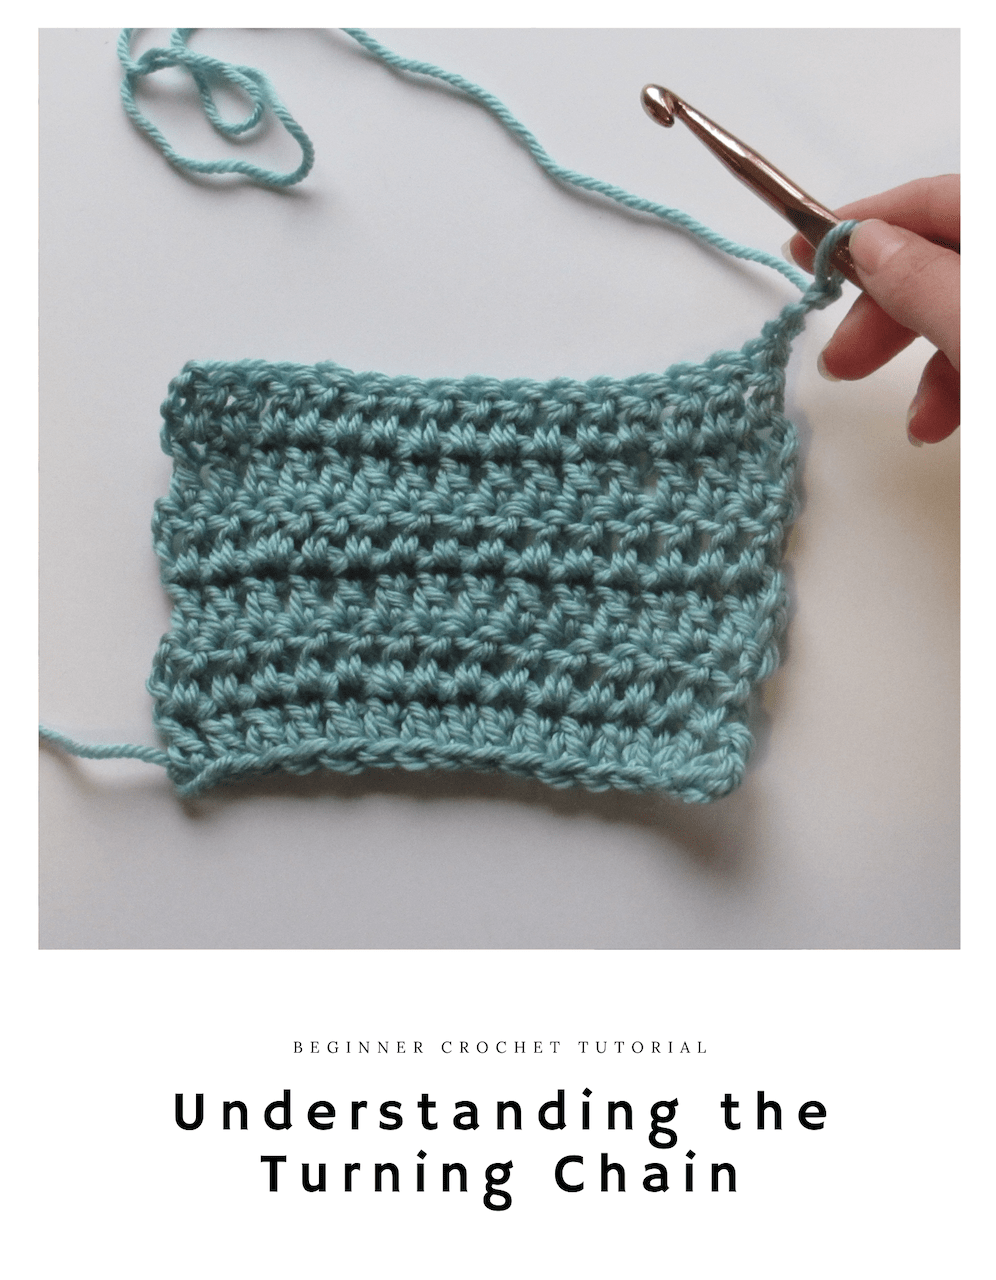 How to Crochet a Turning Chain - multiple chain stitches at the end of a crochet row